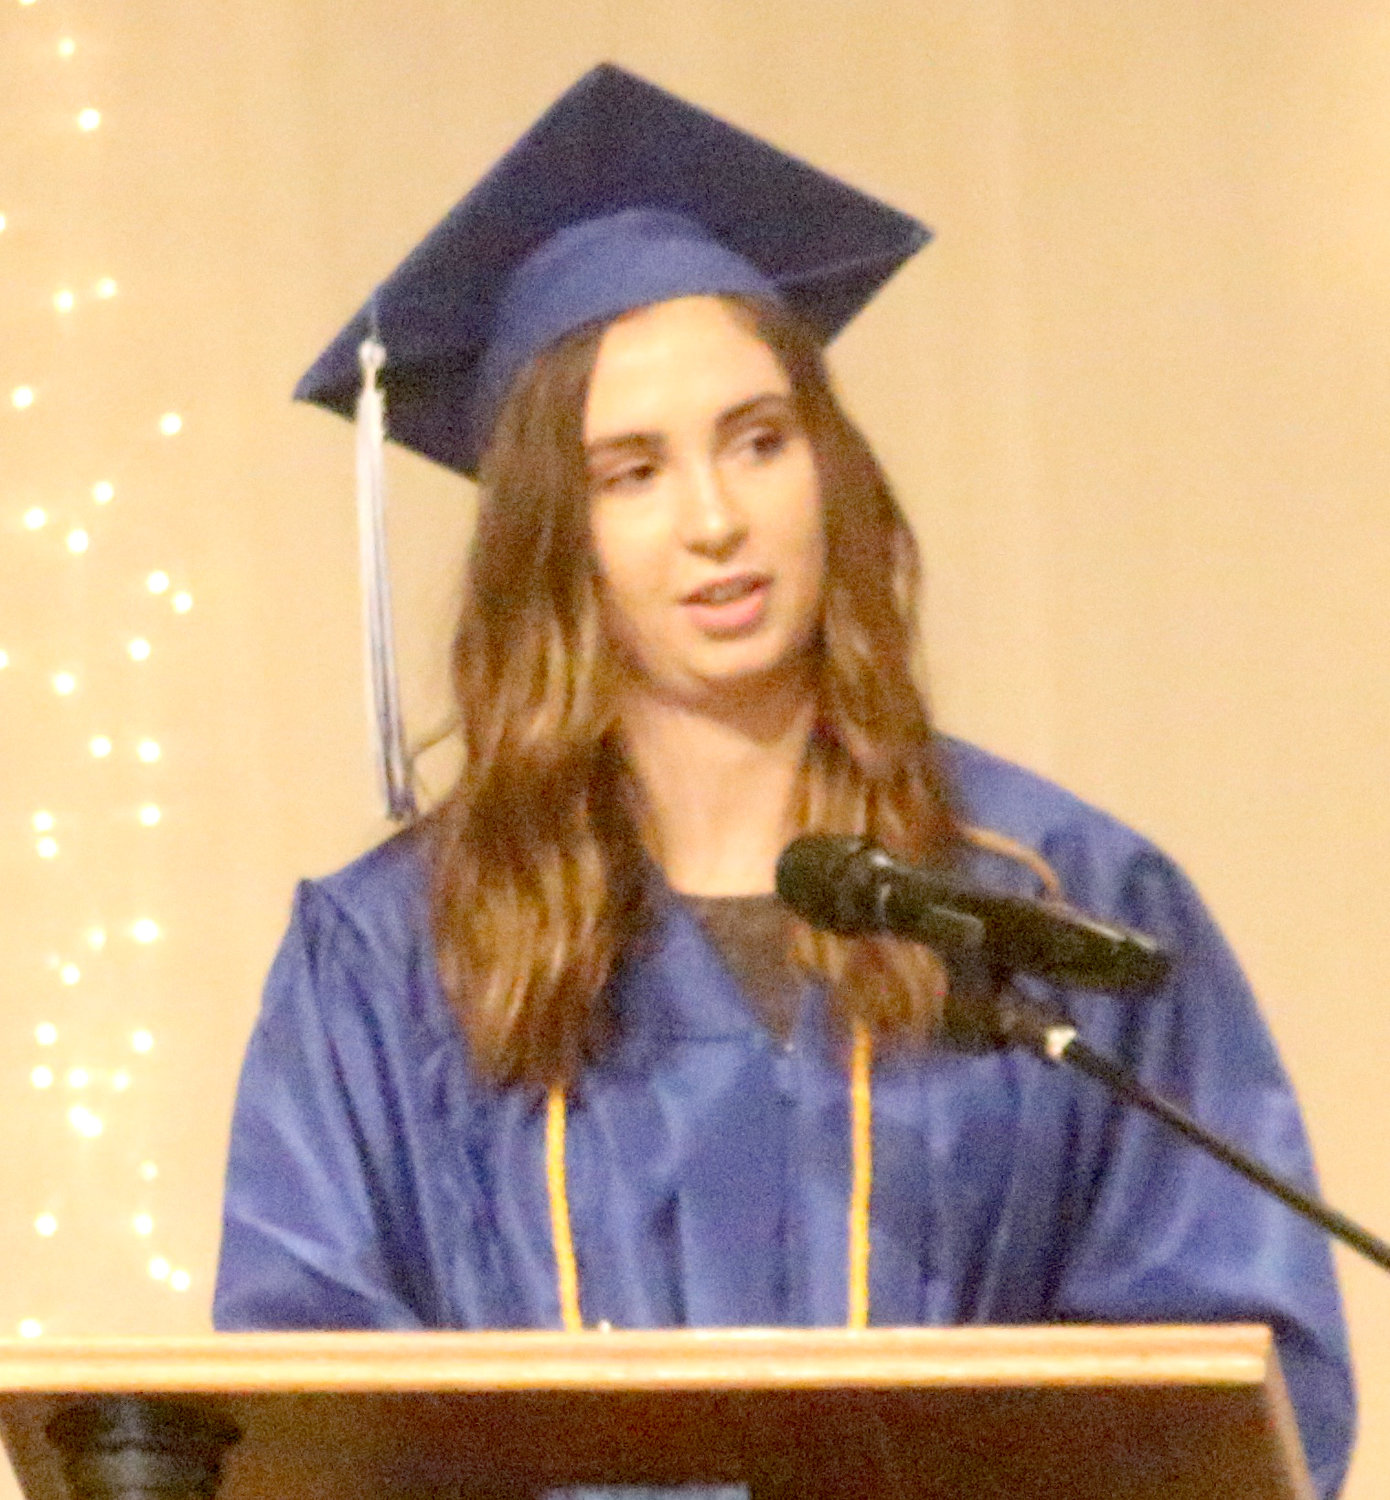 Rachel Schlabach gives the valedictorian address at Pathway Christian School’s commencement ceremony at Upper Deer Creek Mennonite Church on Saturday.